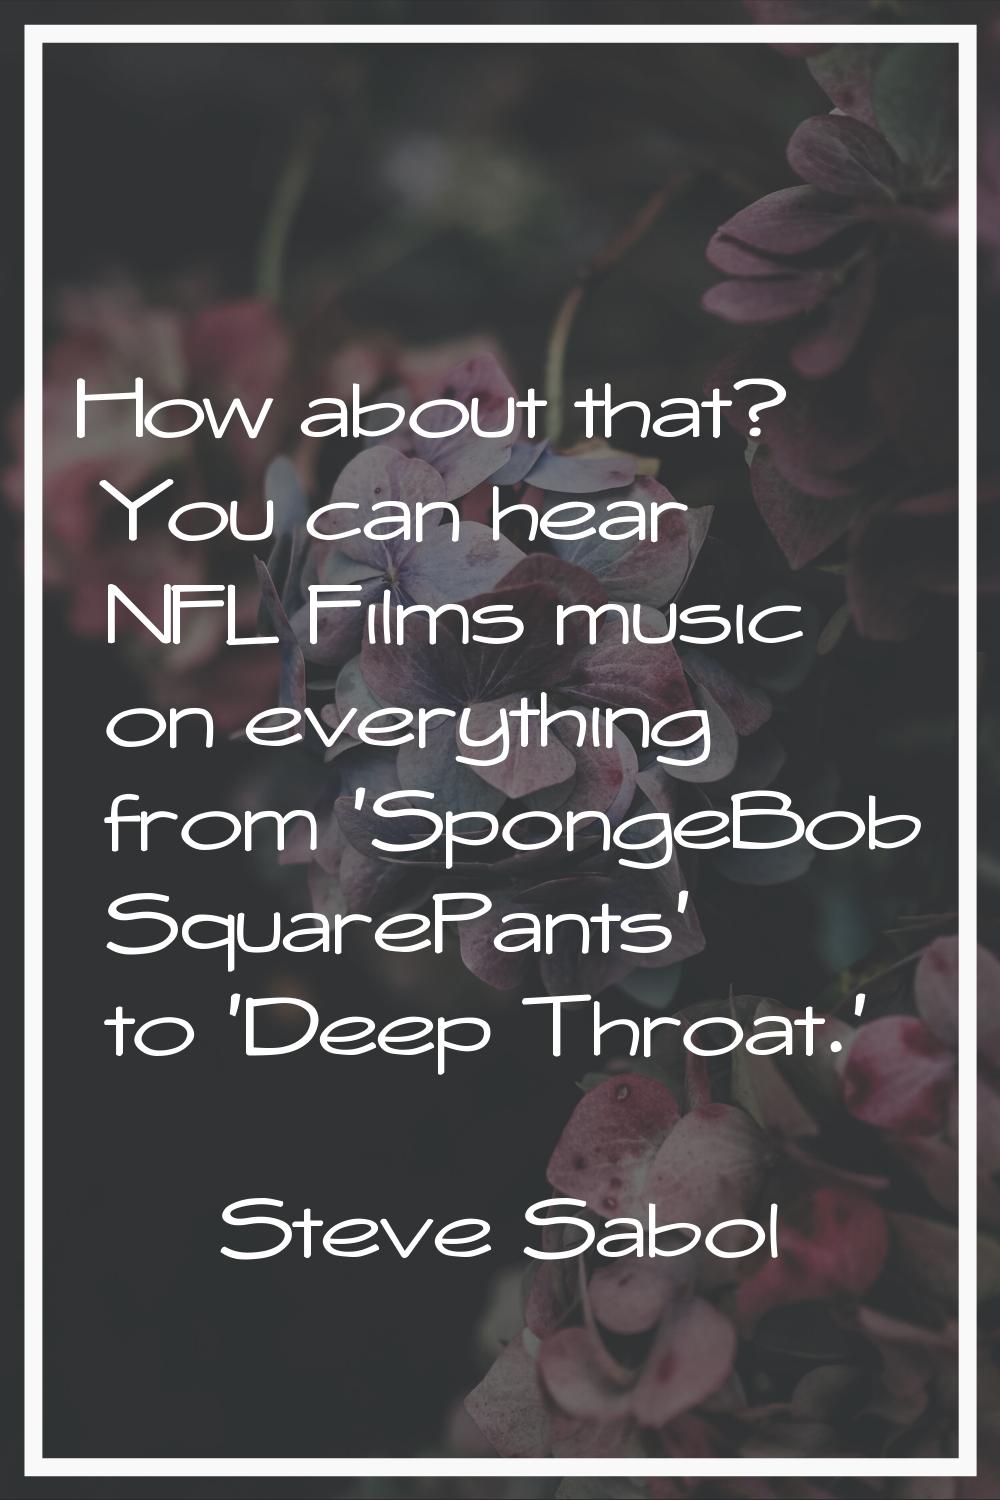 How about that? You can hear NFL Films music on everything from 'SpongeBob SquarePants' to 'Deep Th